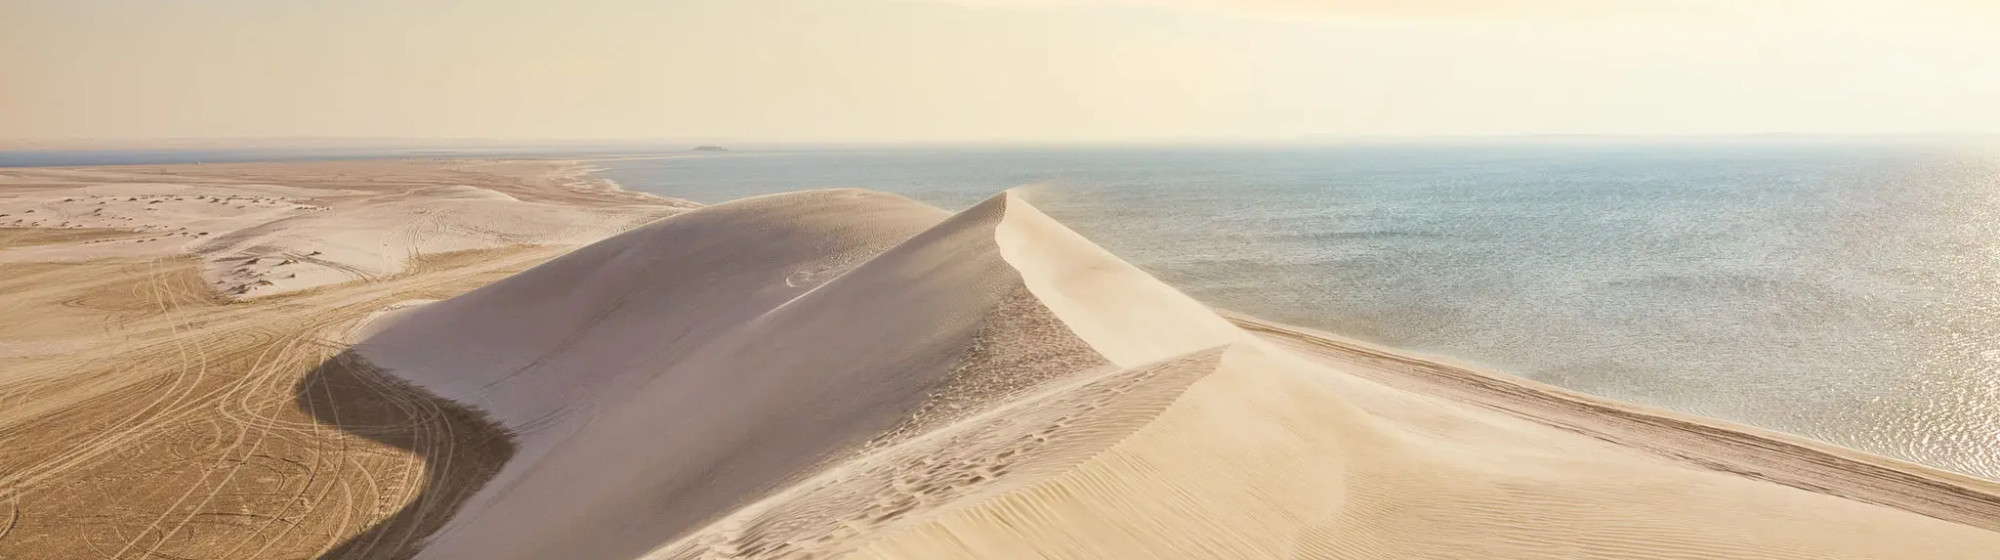 View of Khor Al Adaid, the inlan sea in Qatar from sand dunes